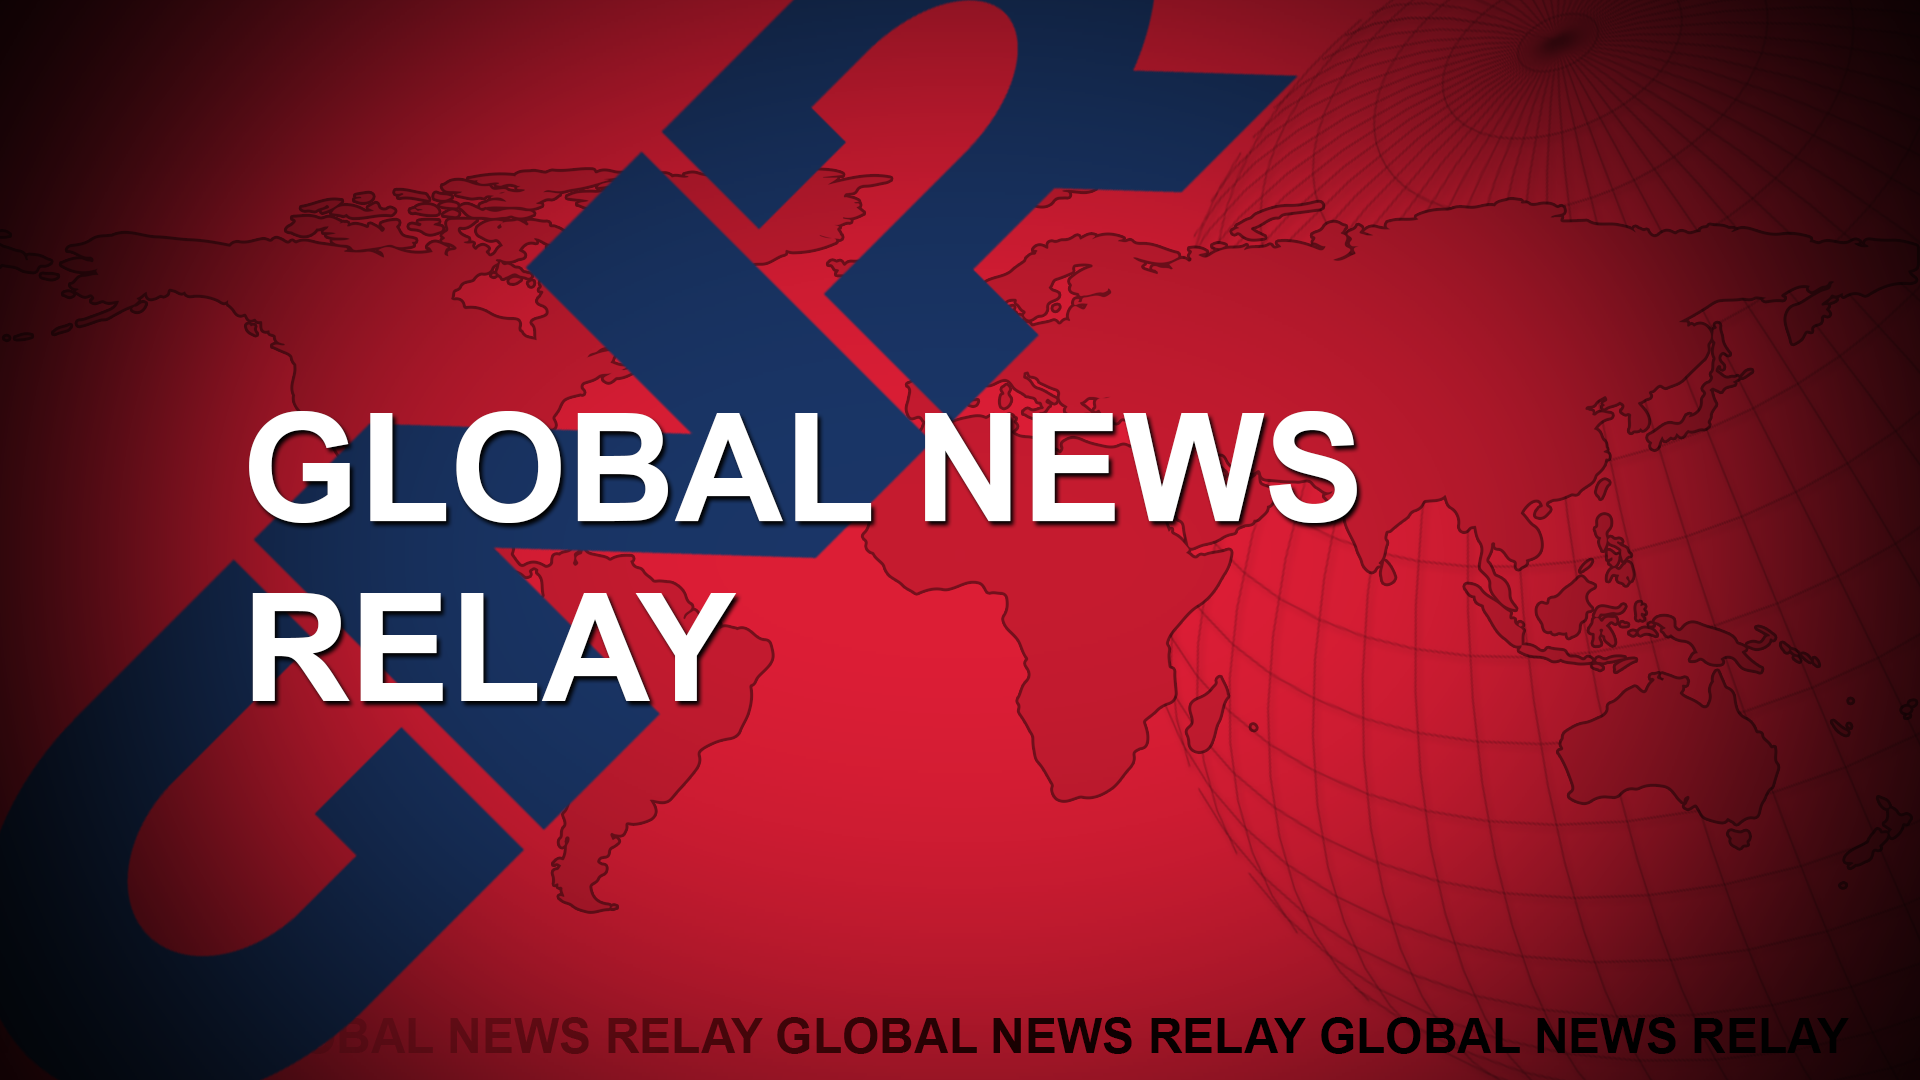 UA Students to Participate in Global News Relay